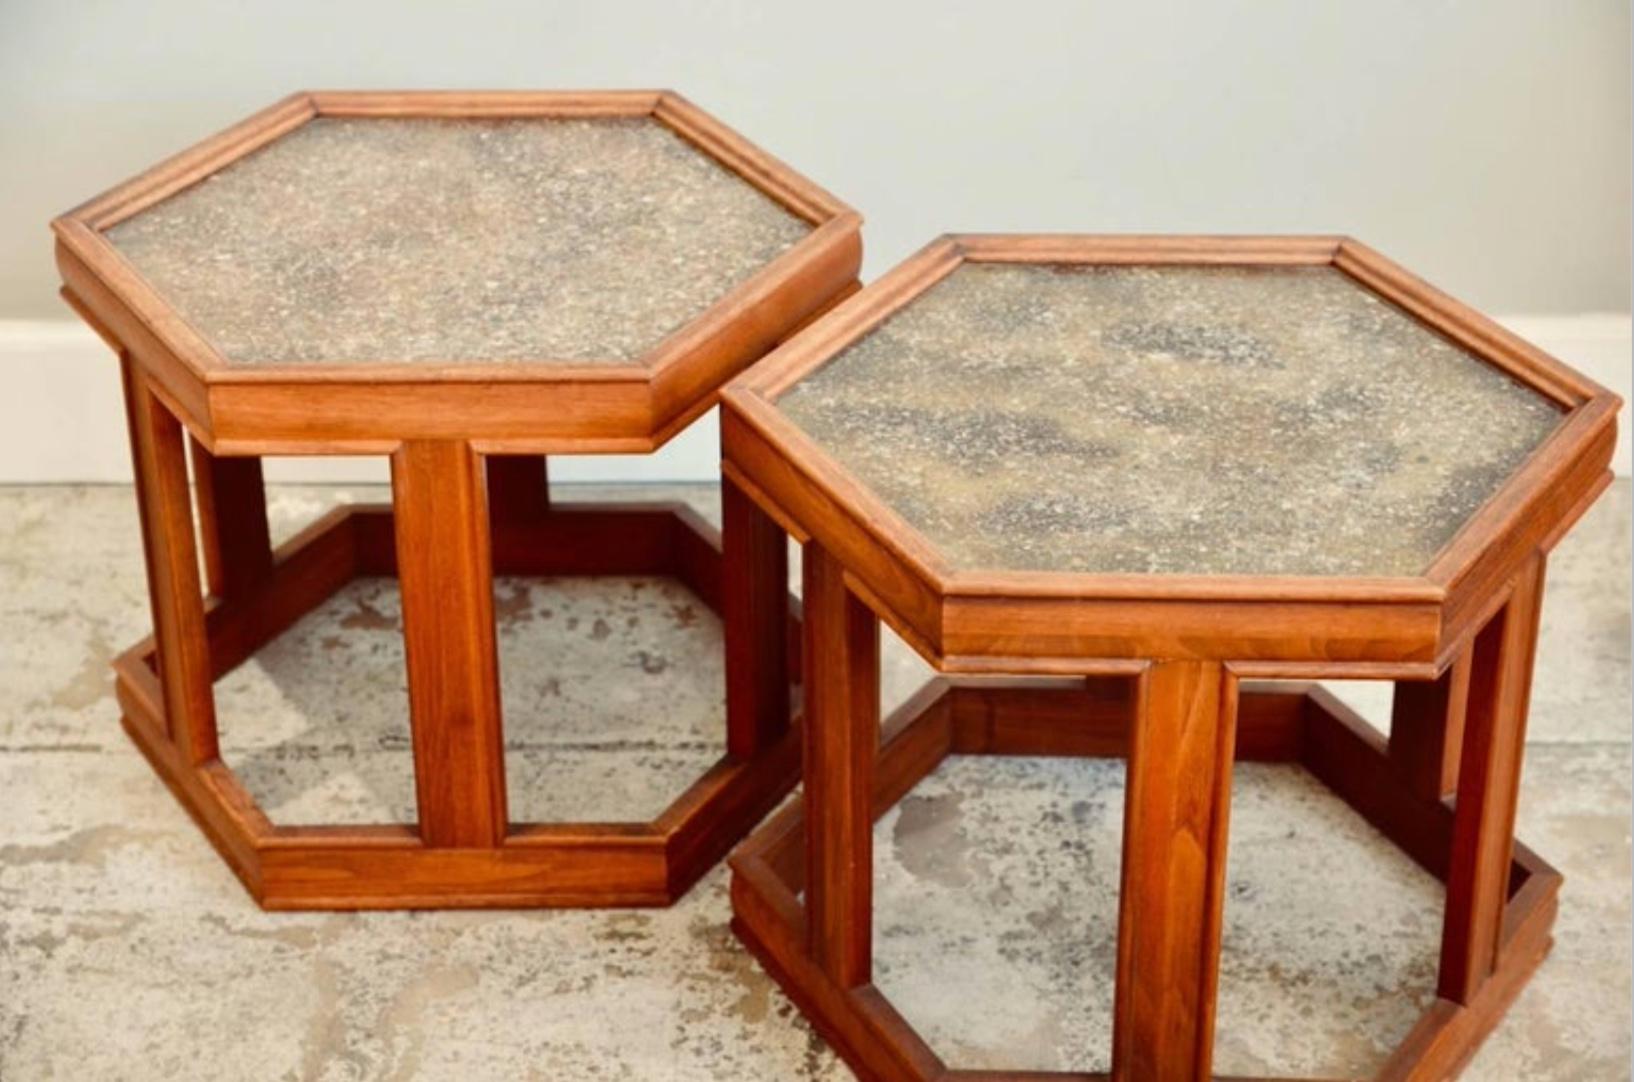 Pair of John Keal for brown saltman hexagonal side tables. Also great together as a small coffee table.